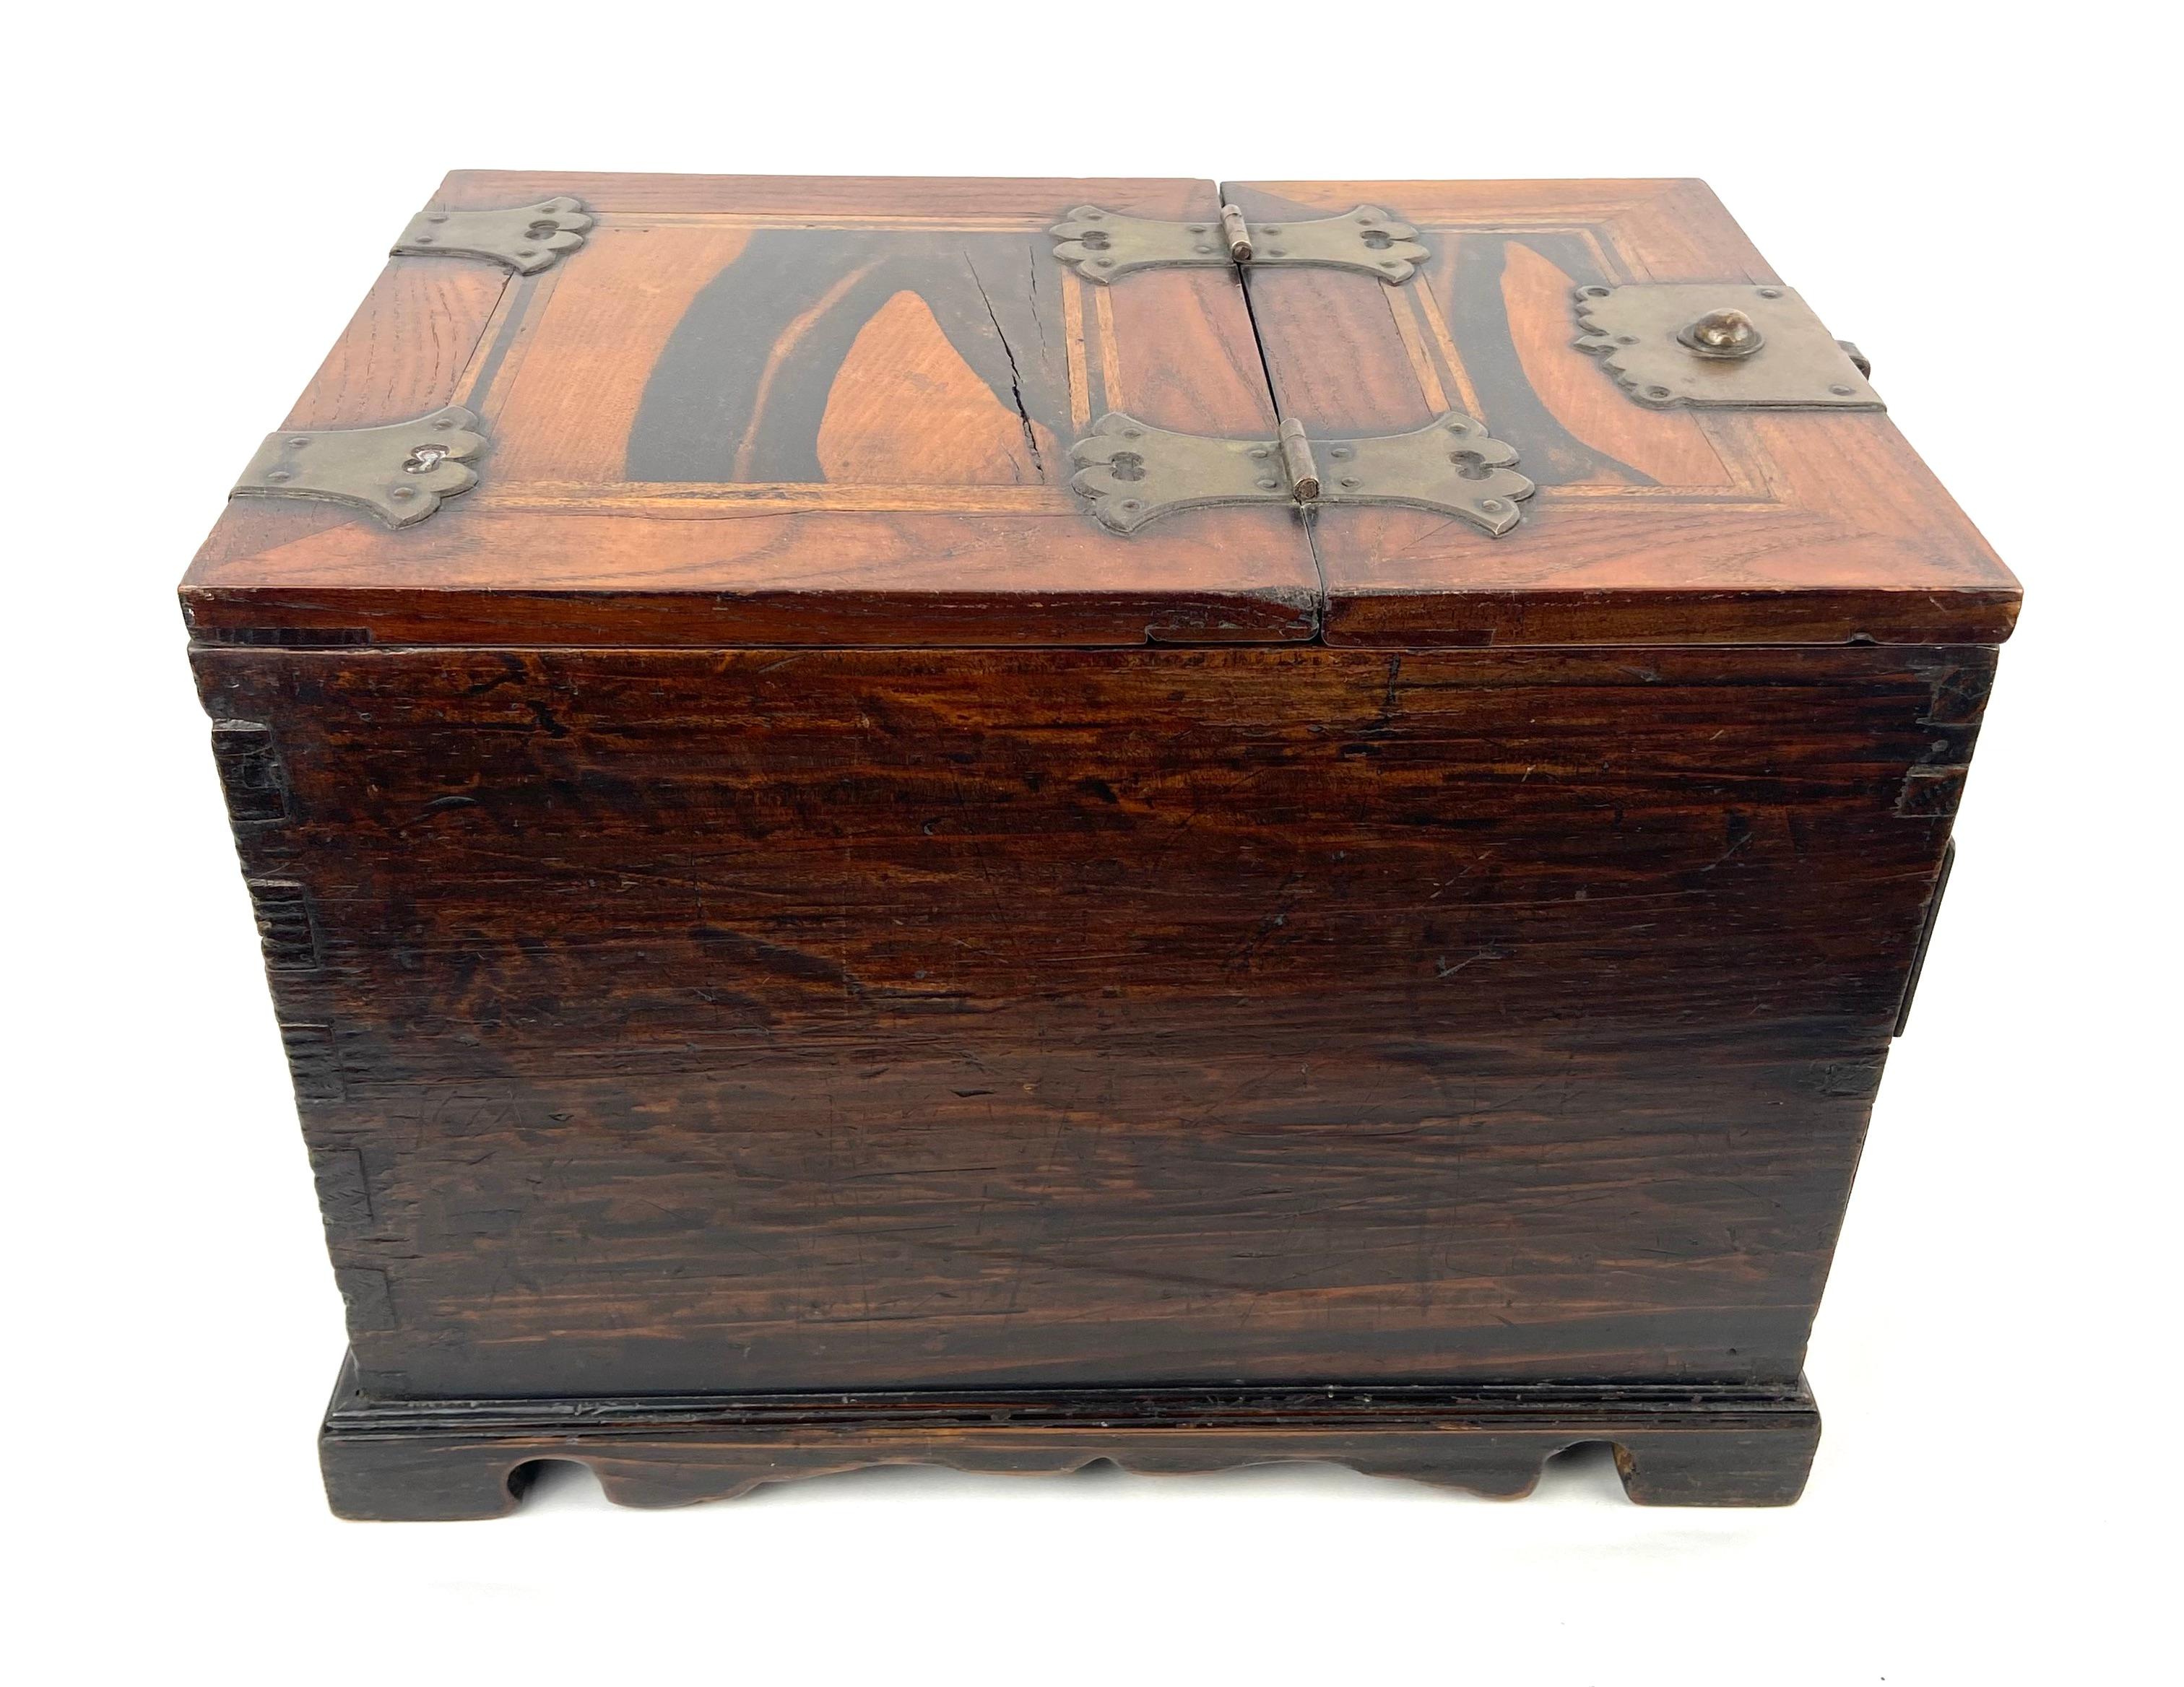 Korean jewelry box in exotic persimmon or kaki wood and brass.  
The box has 2 drawers and on top a flap that serves as a folding mirror.